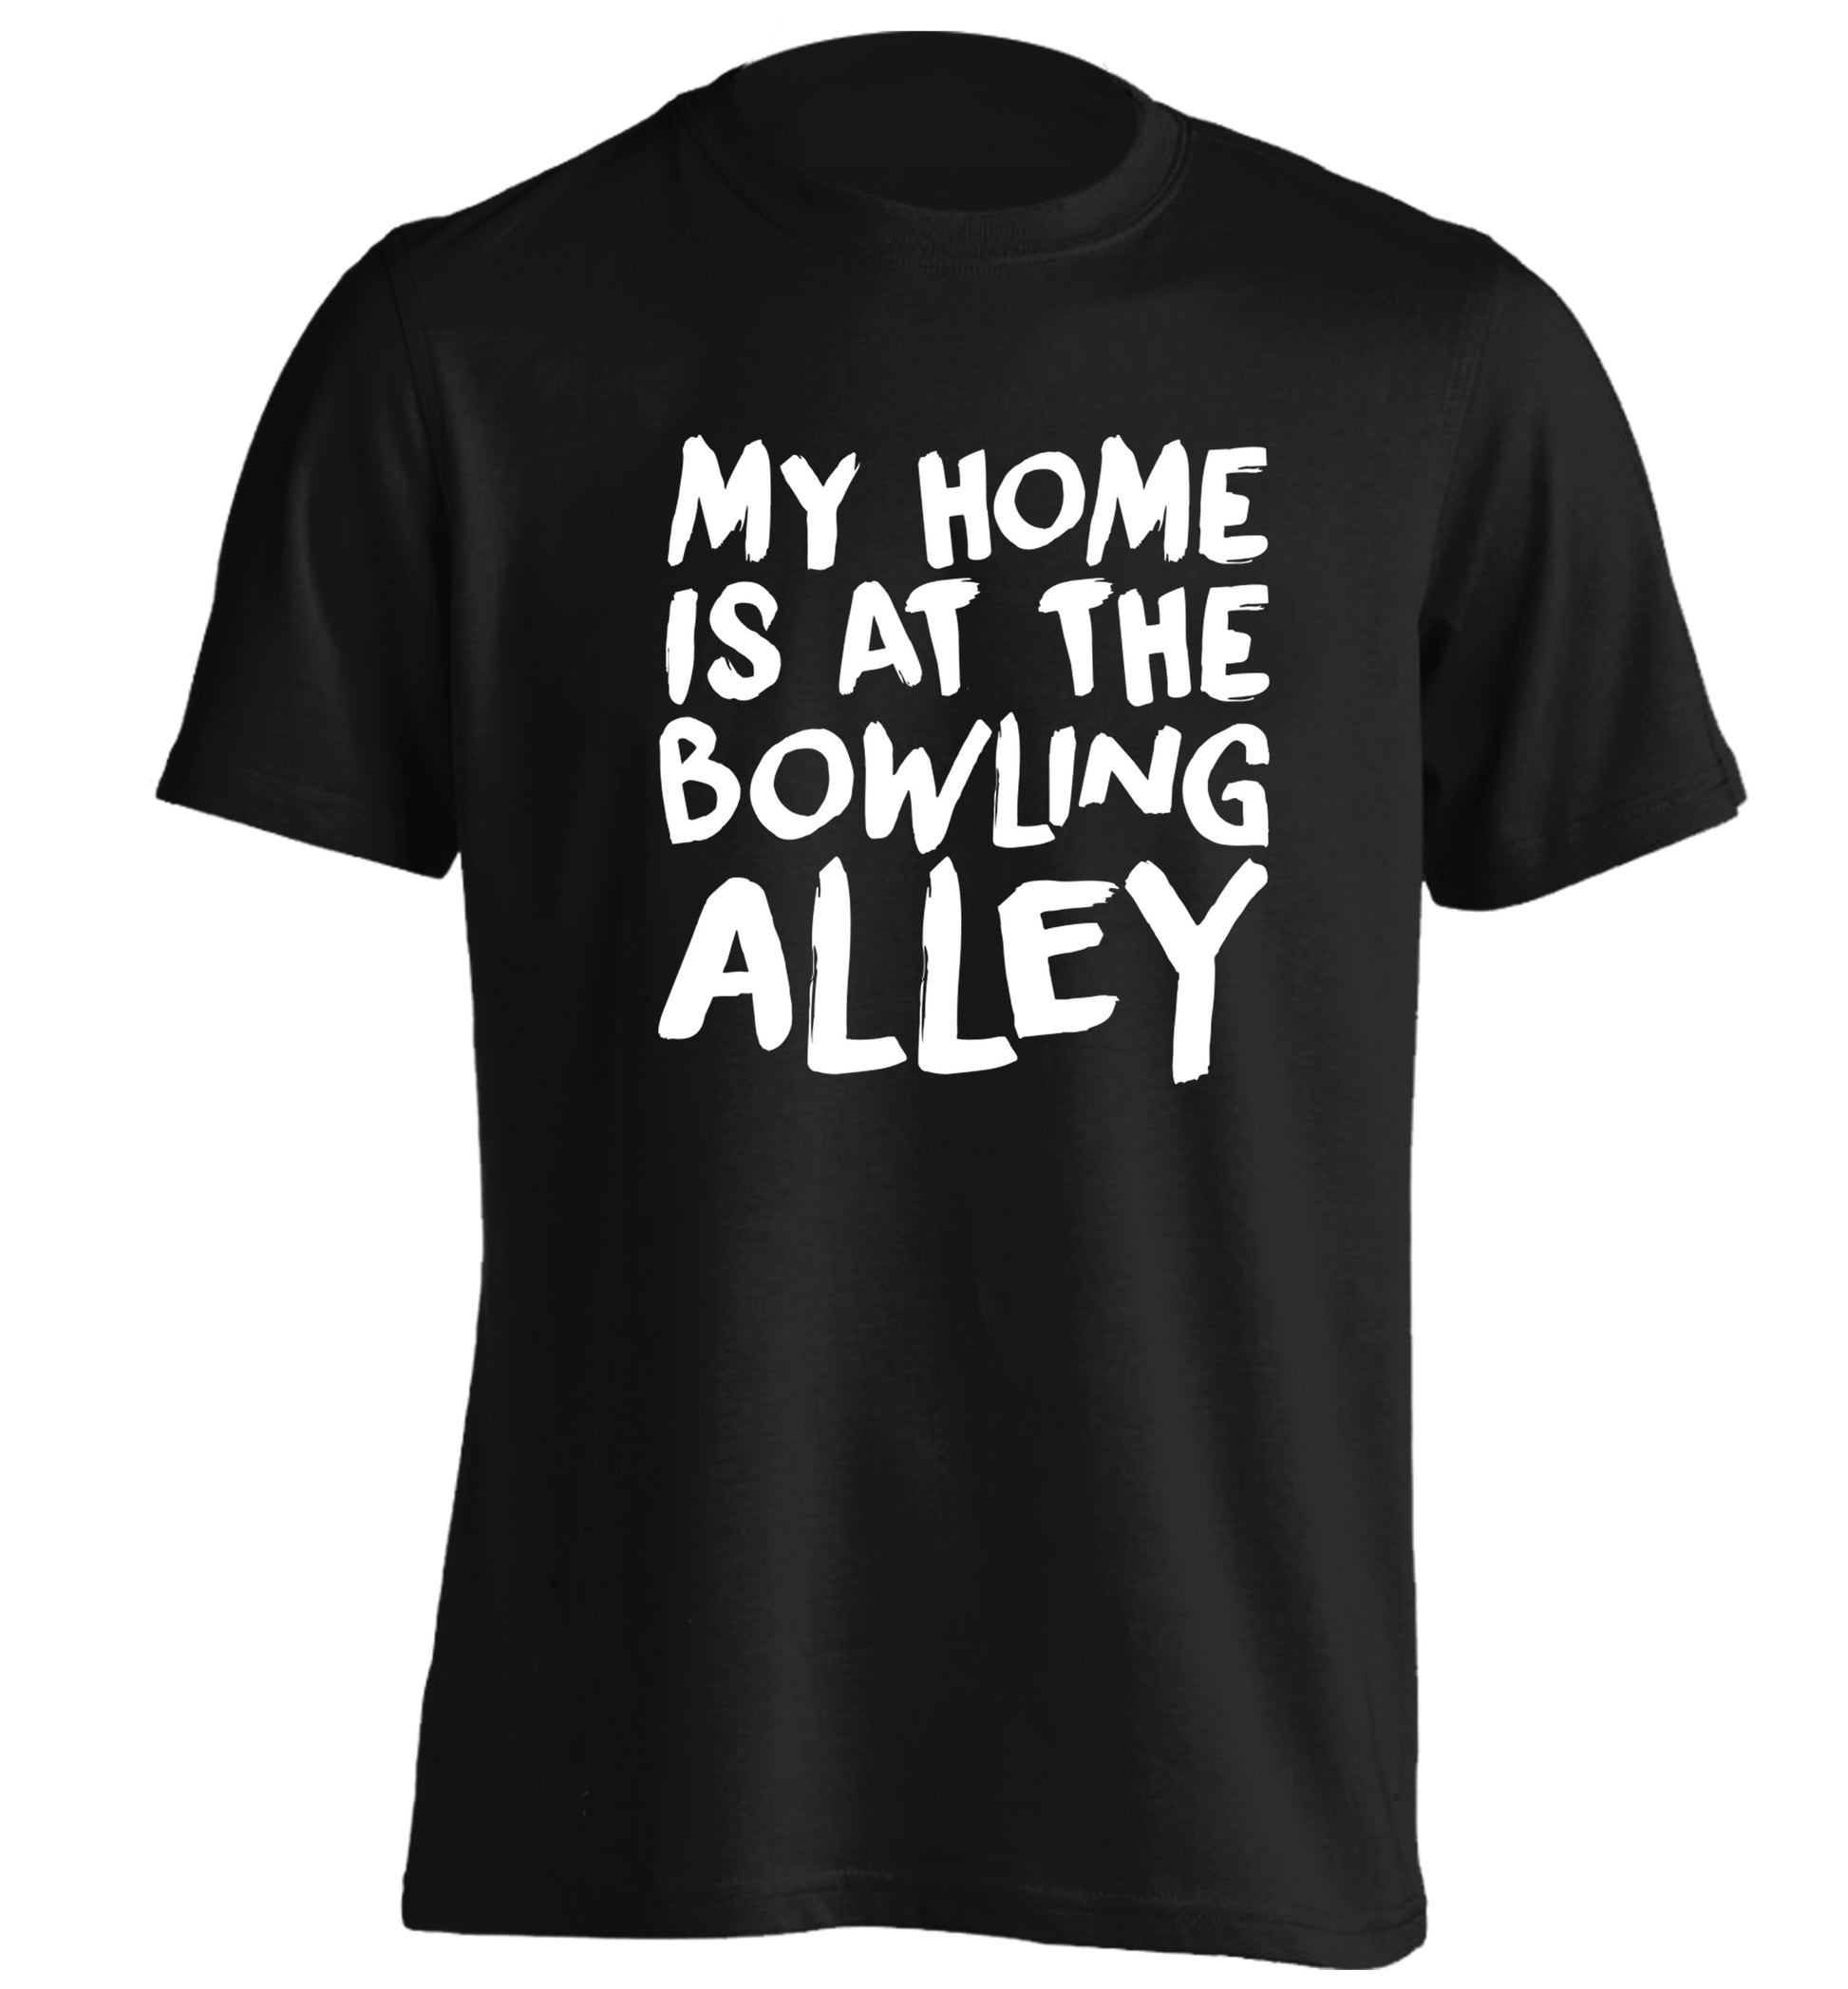 My home is at the bowling alley adults unisex black Tshirt 2XL